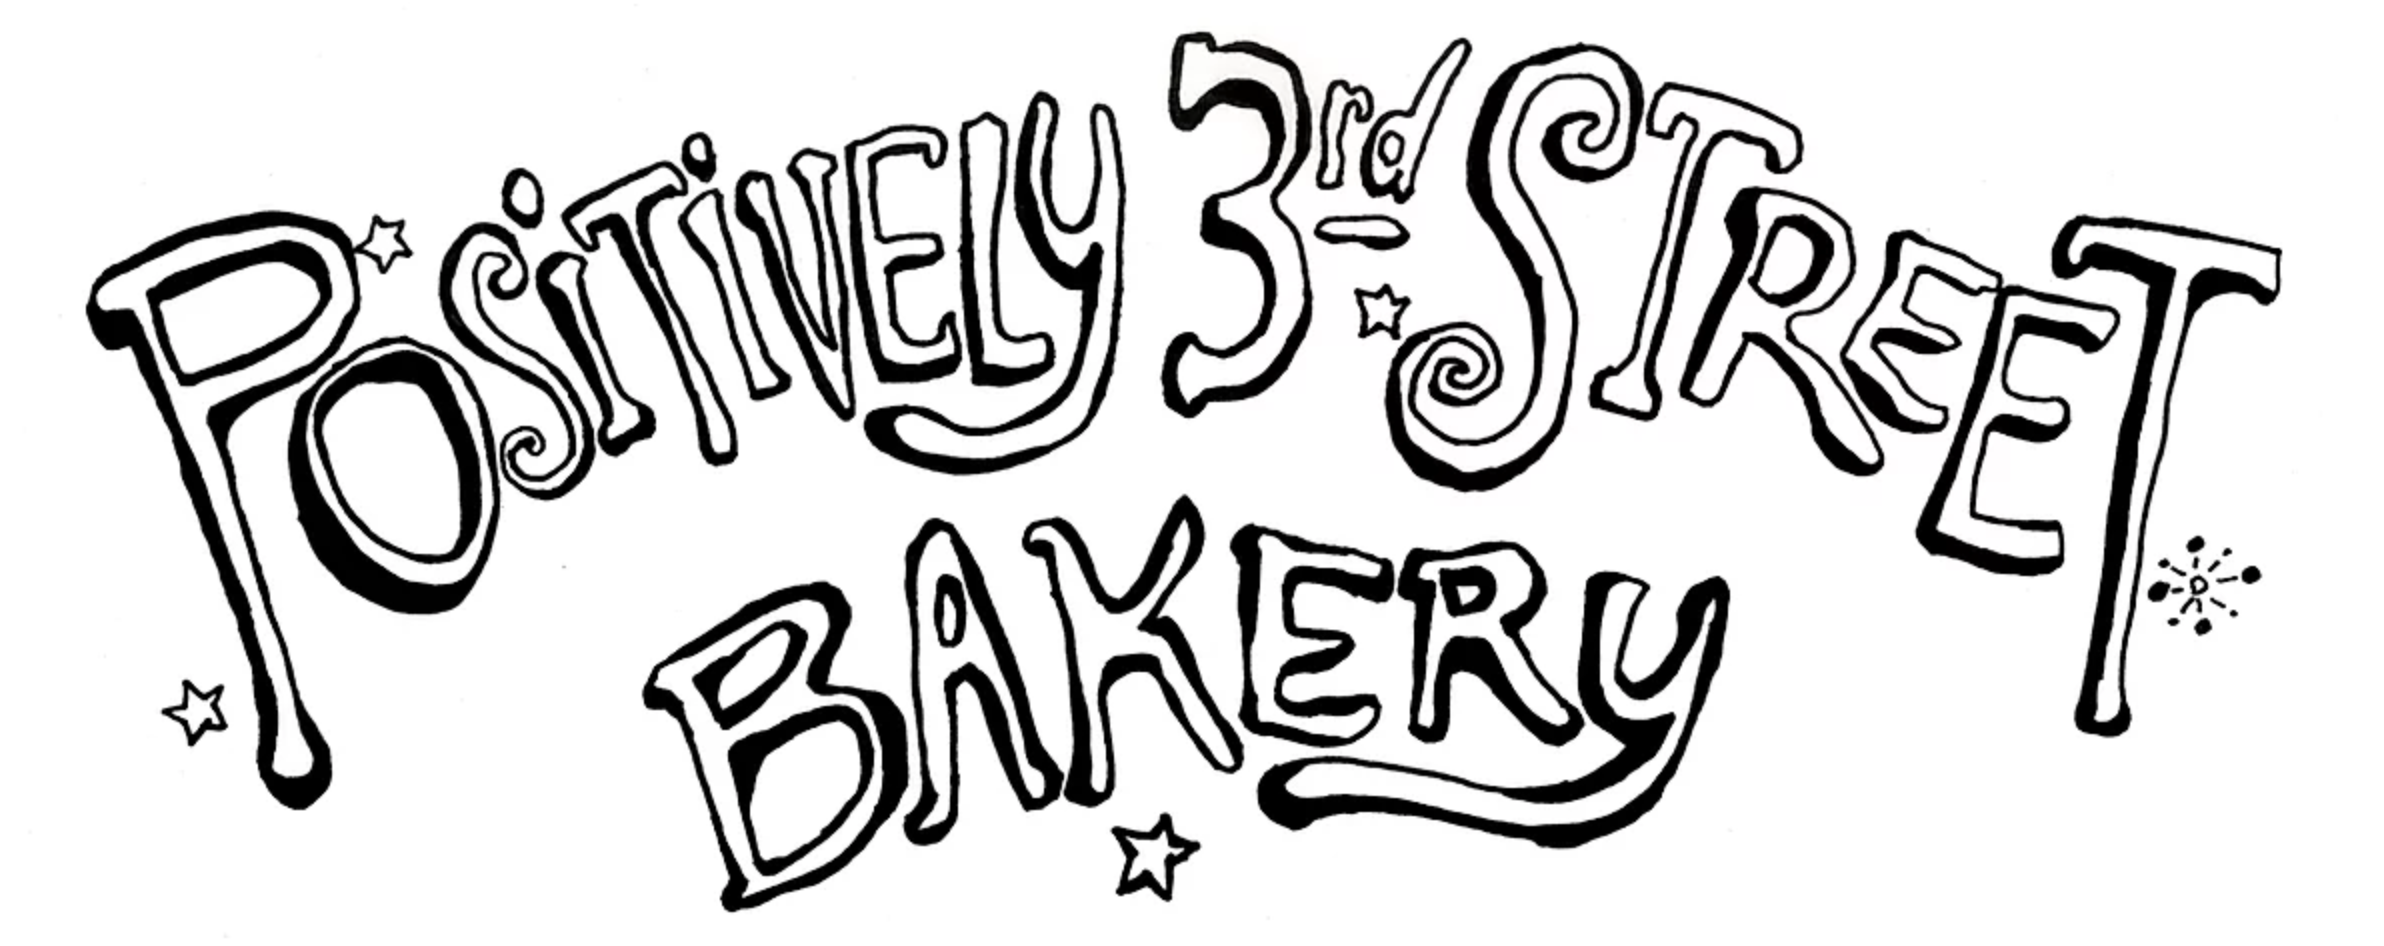 Hand-drawn black and white text of "Positively 3rd Street Bakery" with decorative, playful lettering and star accents surrounding the words, perfectly complementing your morning coffee in Duluth.